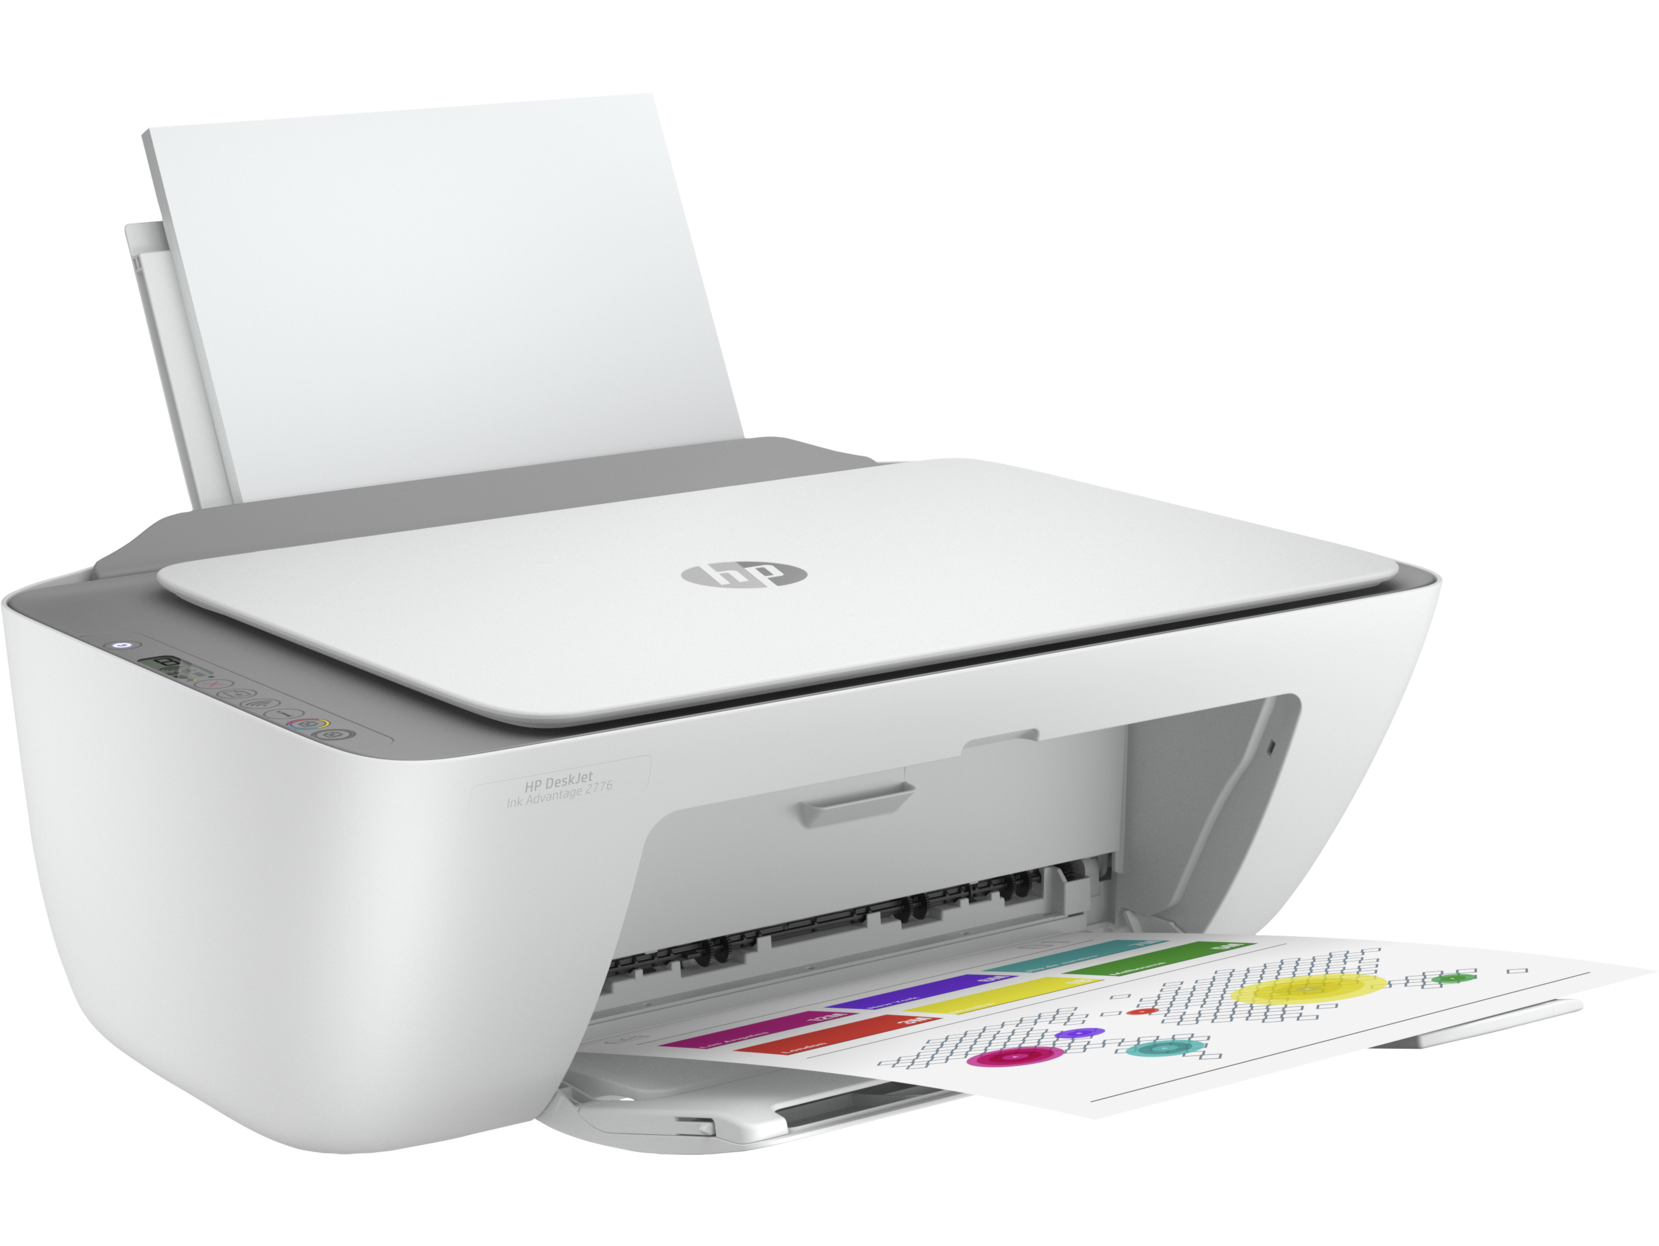 HP Printer DeskJet Ink Advantage AIO Colour 7FR28B/2776 (Print/Scan/Copy/Wifi) 3 Years Onsite Warranty with 1-to-1 Unit exchange **NEED TO ONLINE REGISTER**